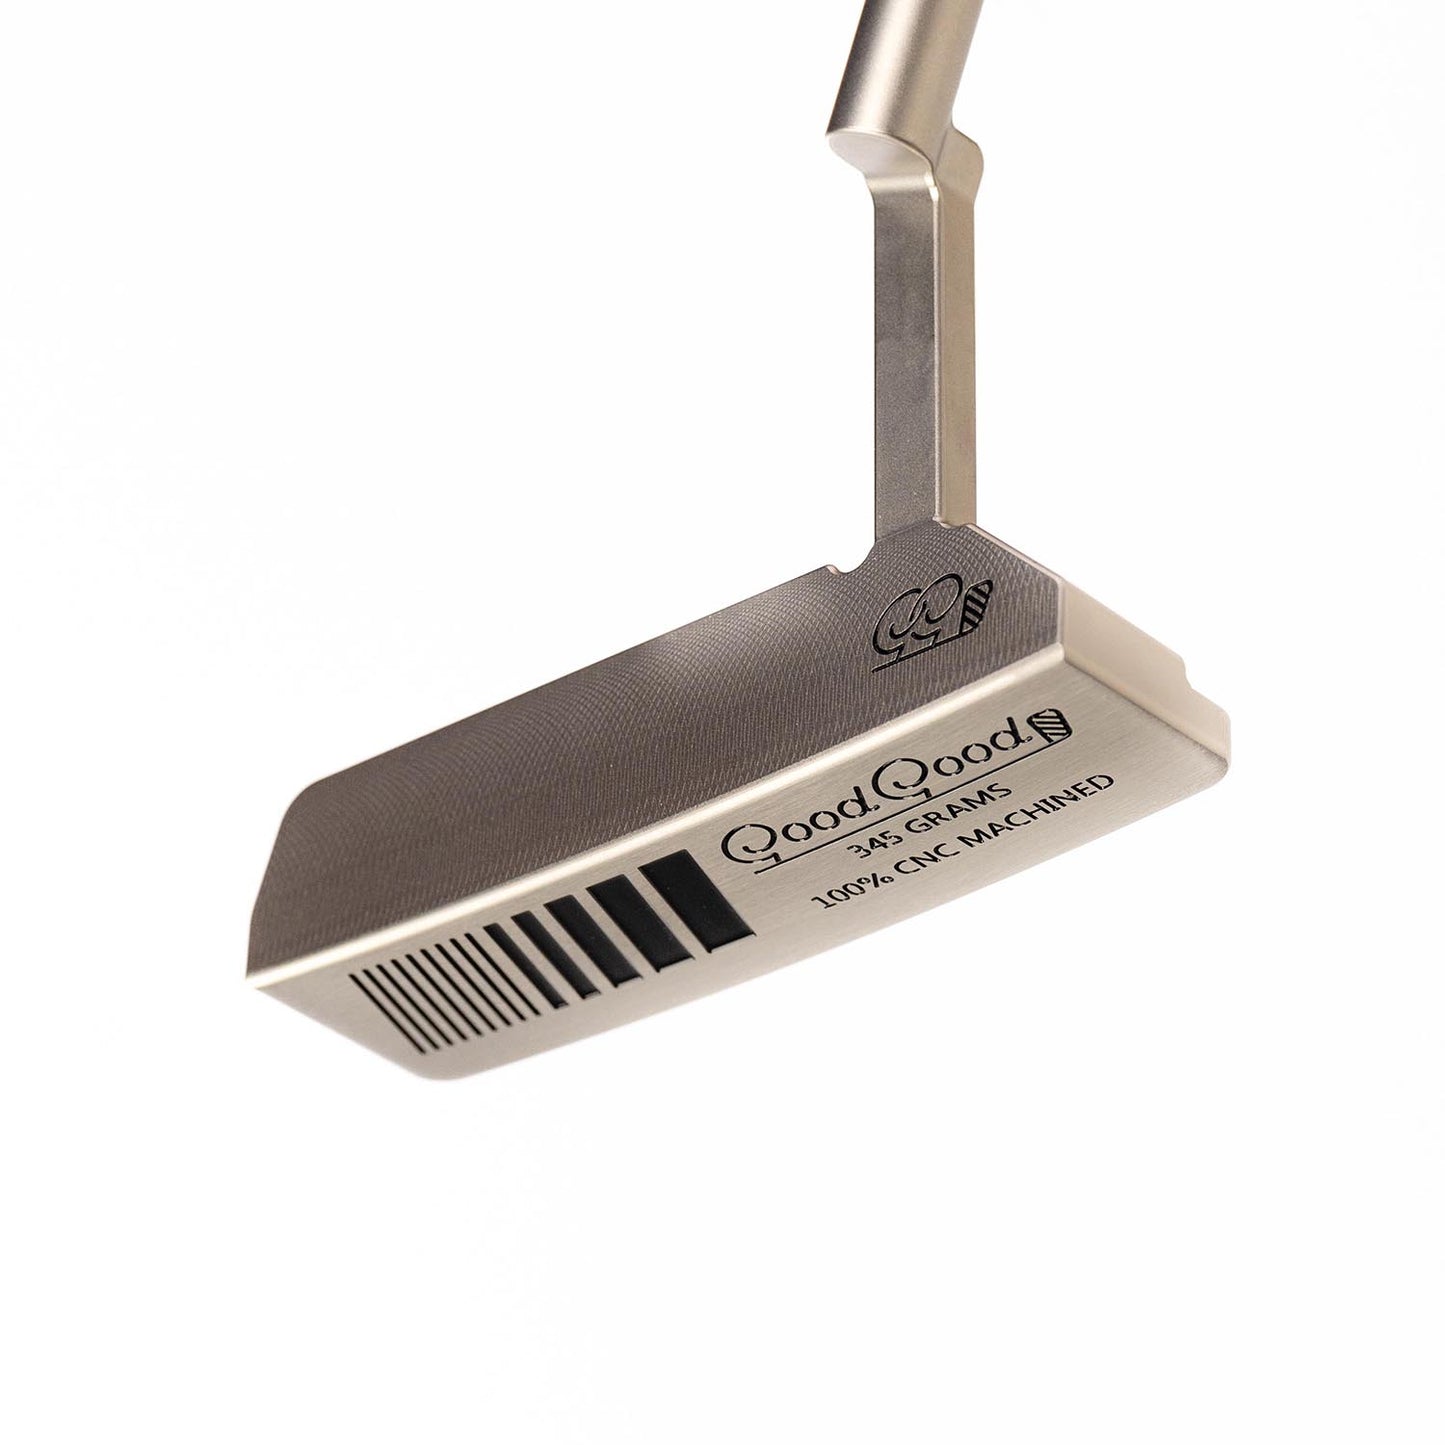 The Satin Blade Putter